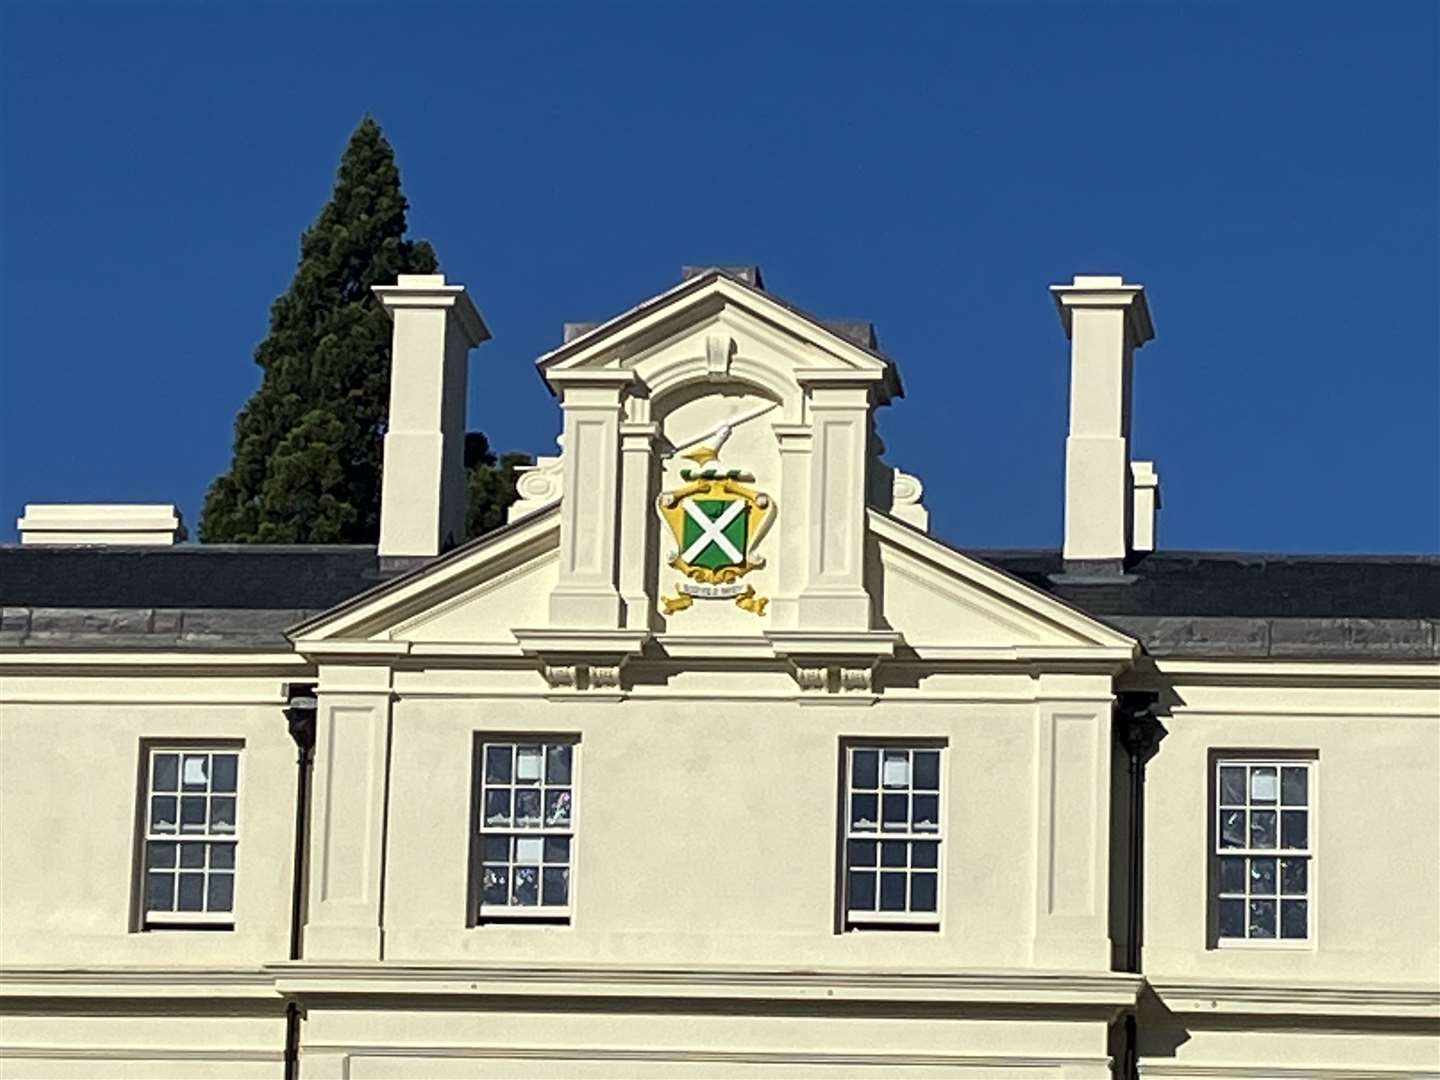 Sir Joseph Hawley's coat of arms has been given a fresh coat of paint on the manor house at Leybourne Chase